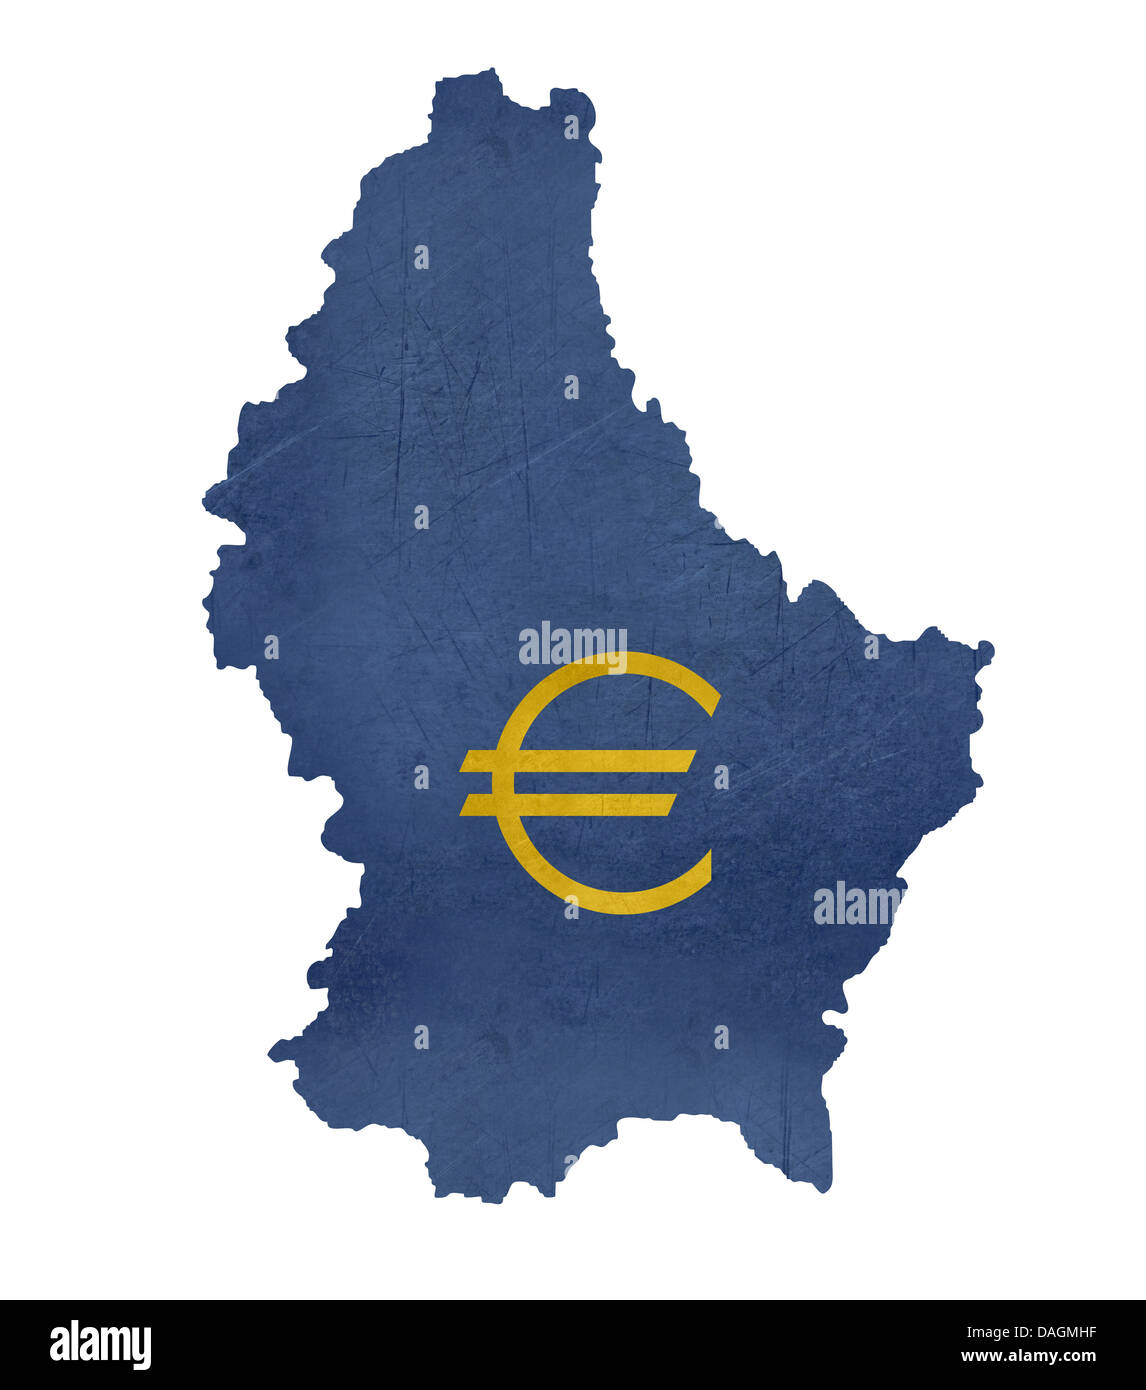 European currency symbol on map of Luxembourg isolated on white background. Stock Photo